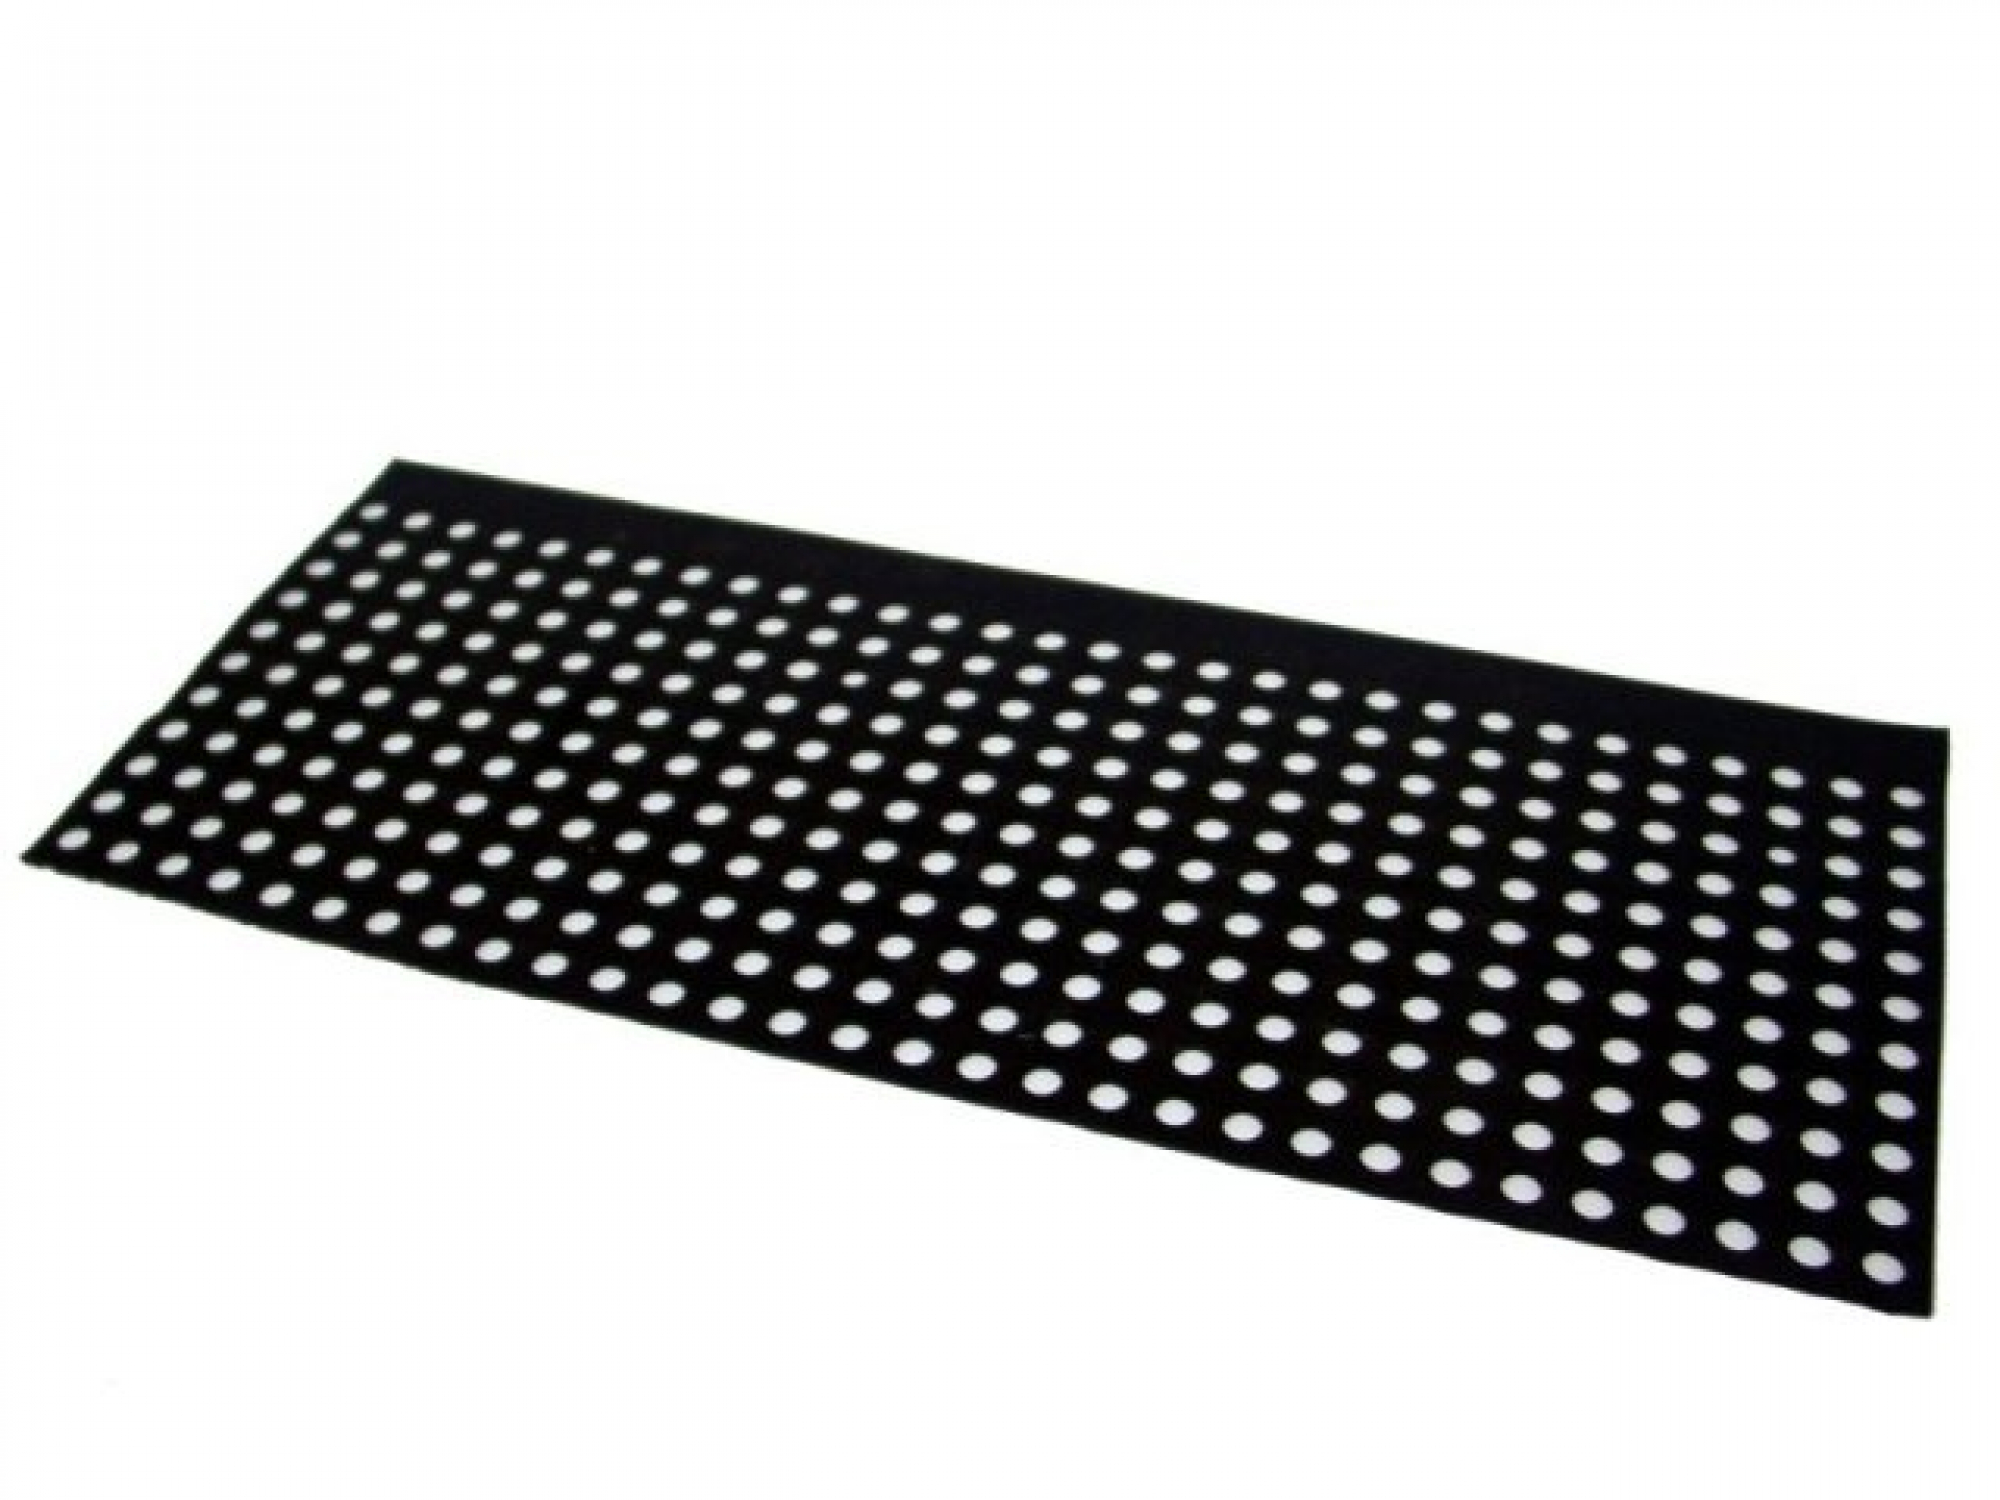 Perforated rubber mat 600 x 420 mm